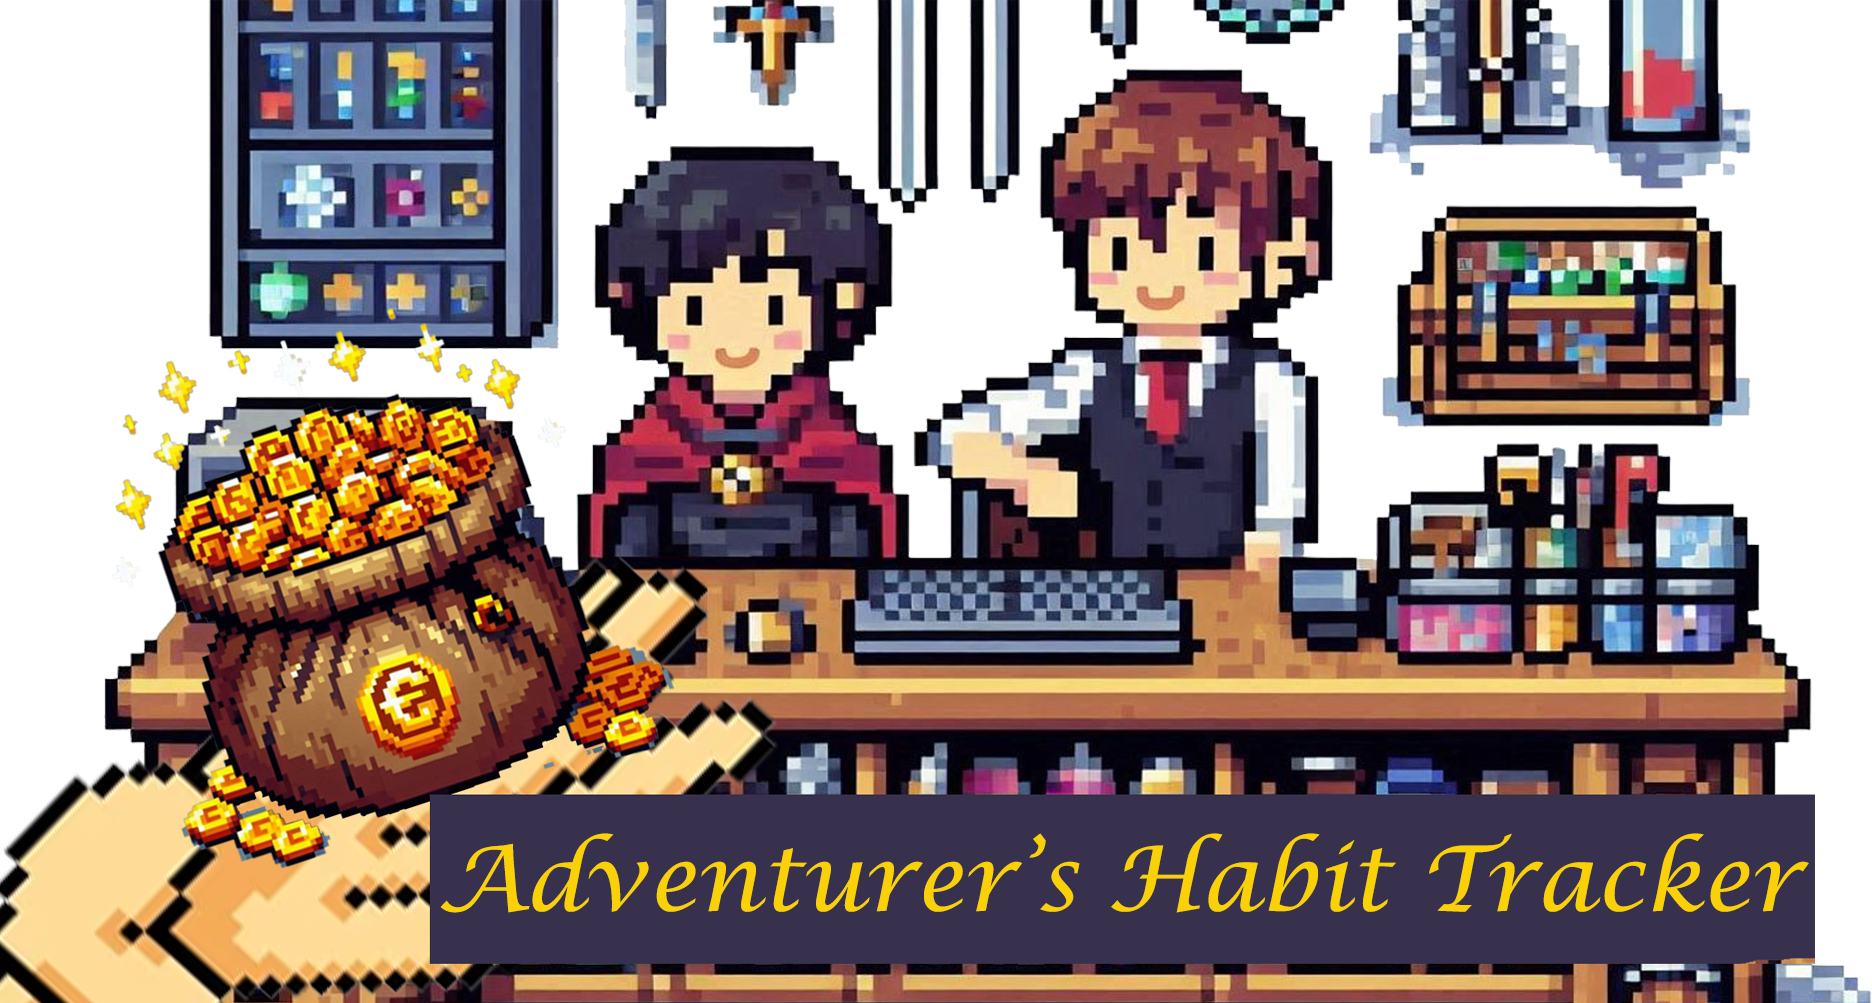 Earn coins by completing habits, then treat yourself in the shop. Fully customizable for your unique adventures!